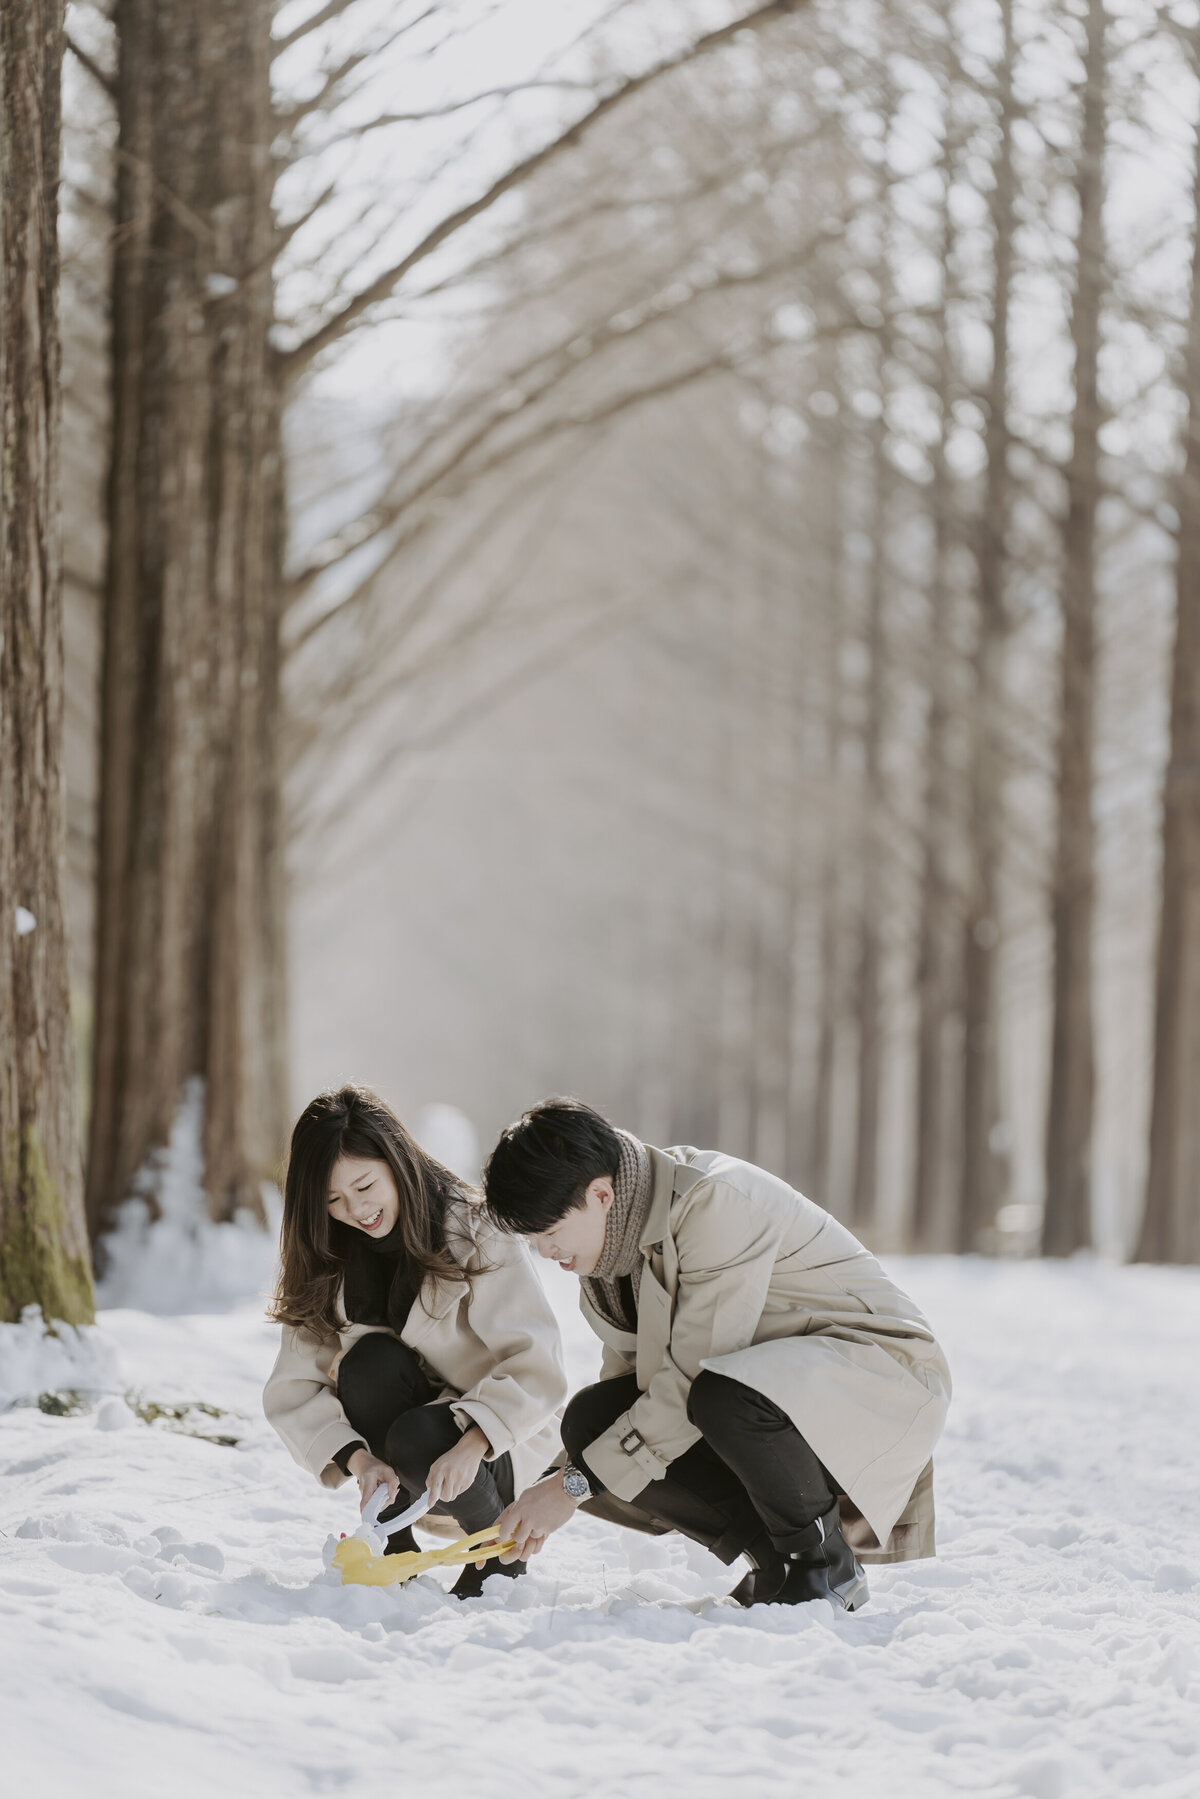 the couple playing in the snow and making their snow duck using their yellow duck maker tool